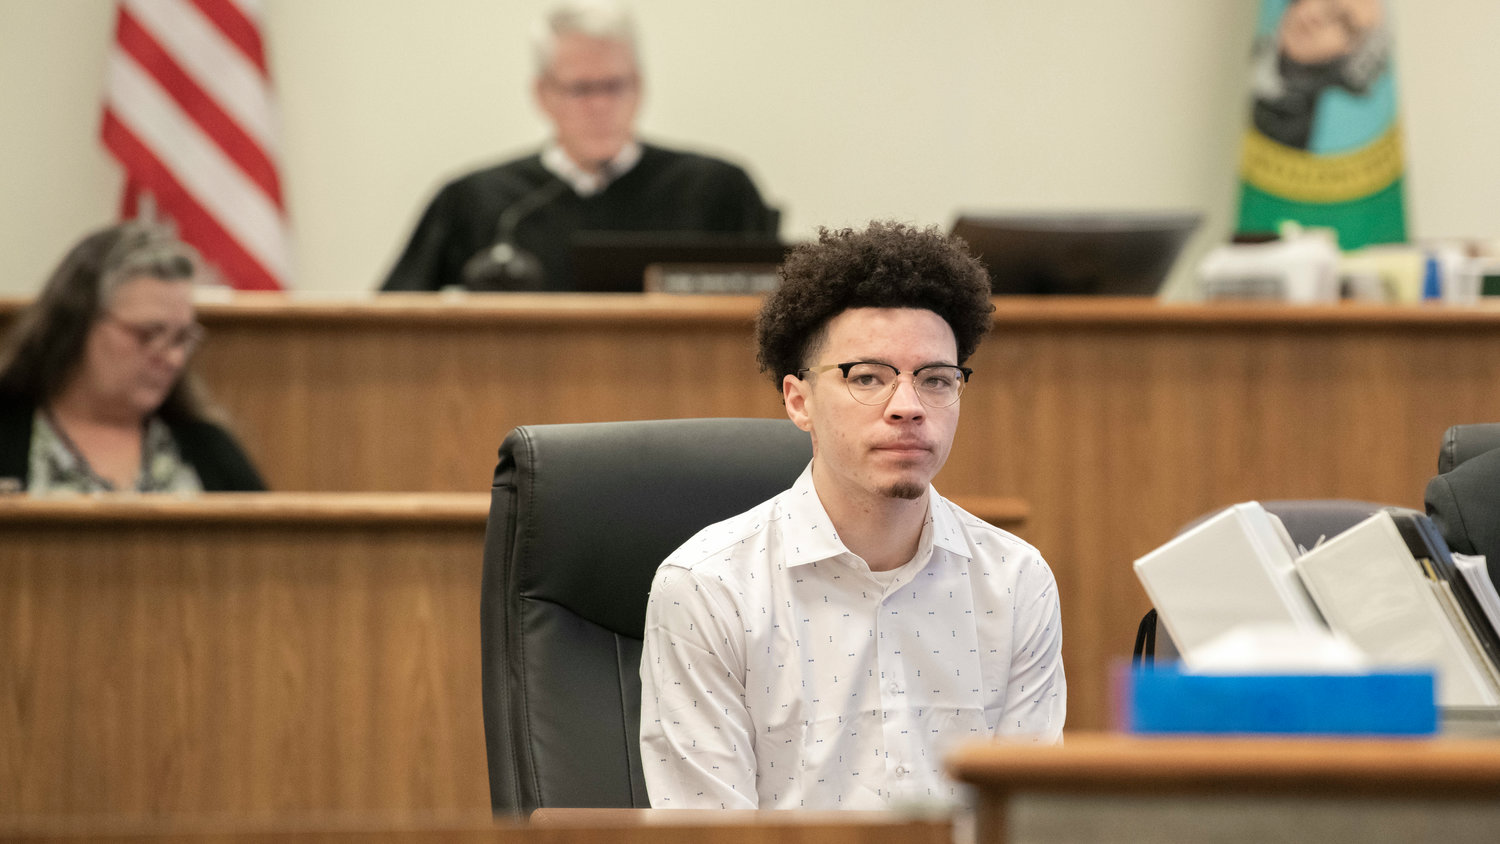 Lathan Echols, who uses the stage name Lil Mosey, appears in Lewis County Superior Court for jury selection on Tuesday in Chehalis.